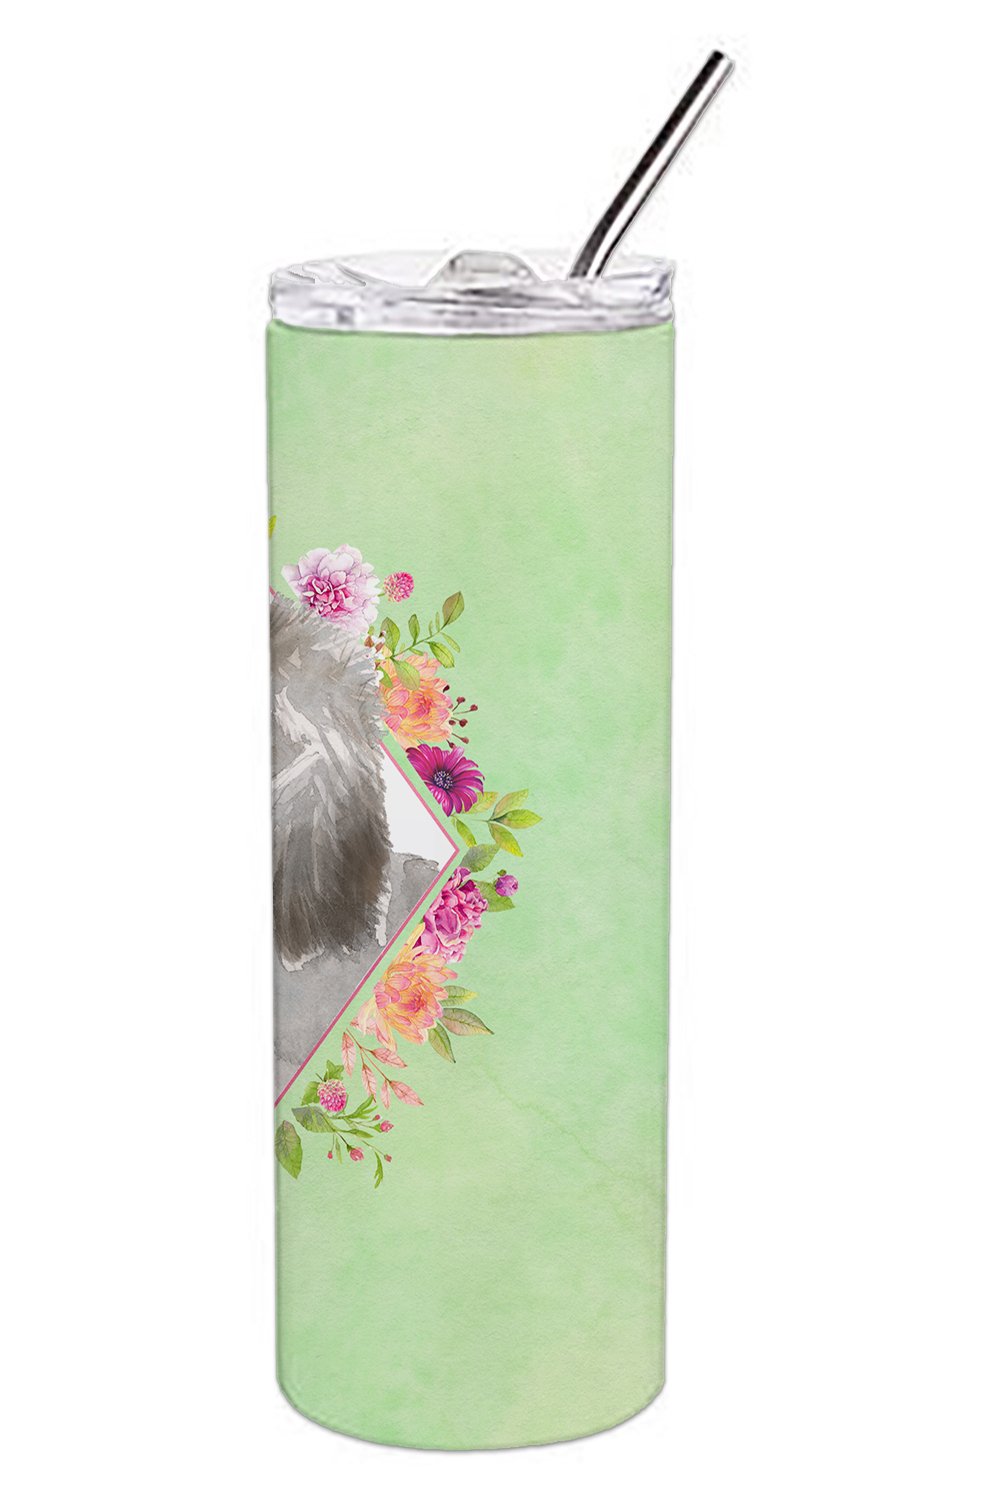 Grey Standard Poodle Green Flowers Double Walled Stainless Steel 20 oz Skinny Tumbler CK4393TBL20 by Caroline's Treasures